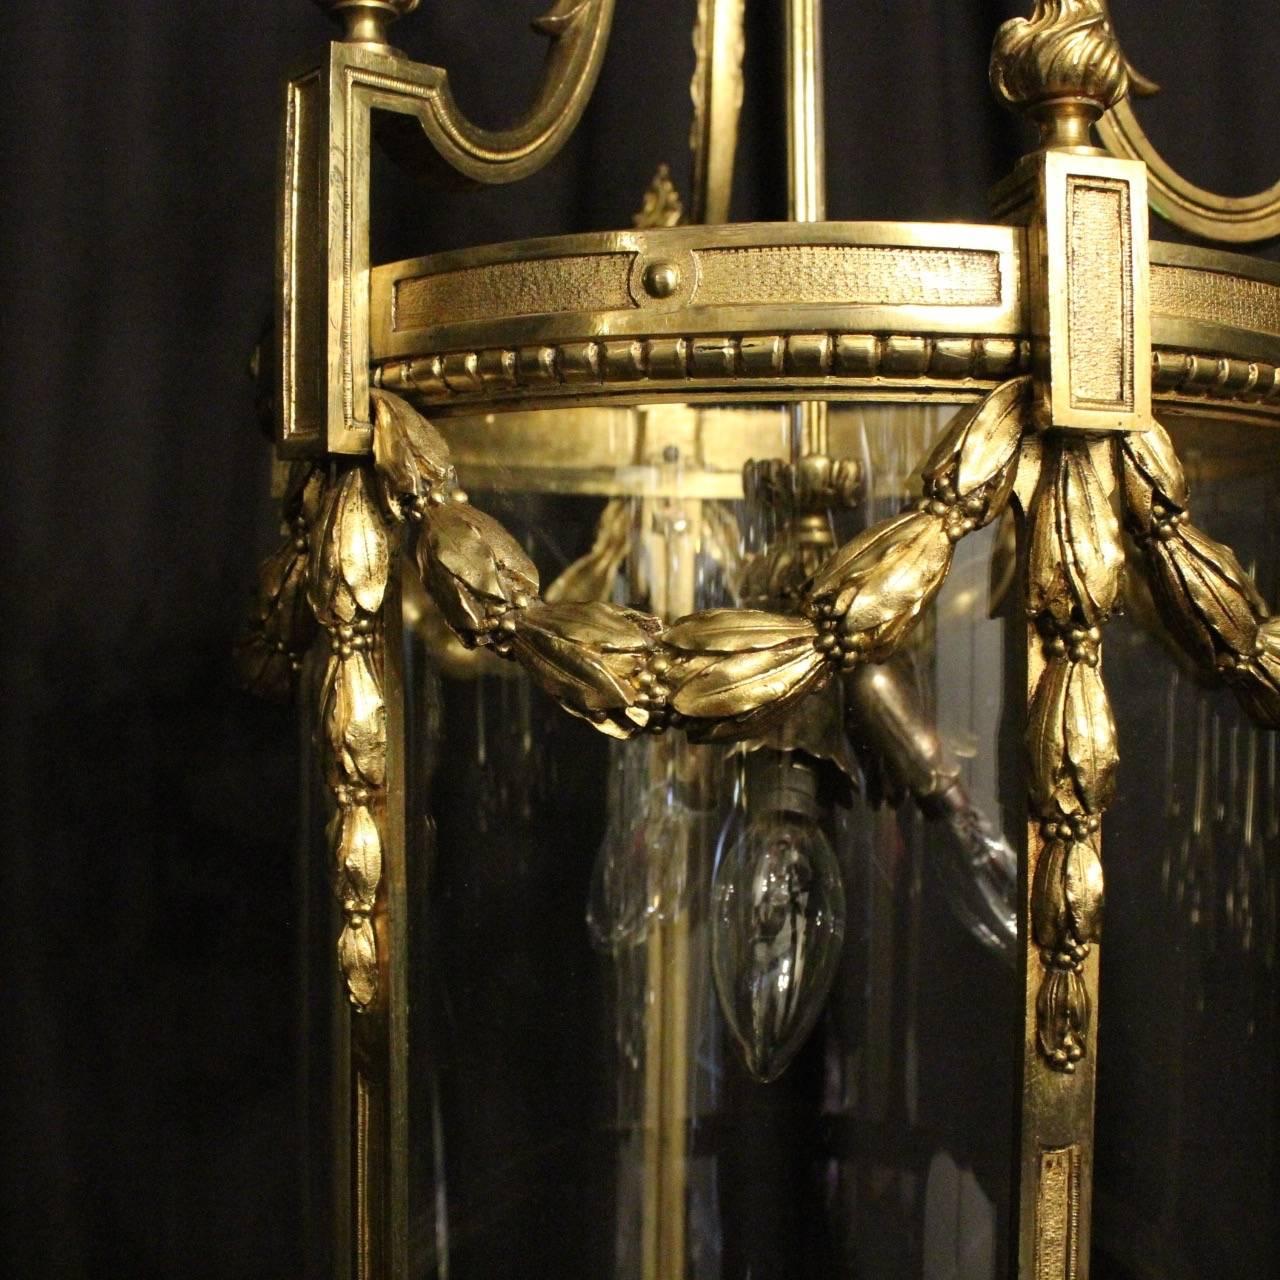 Quality French gilded bronze triple-light antique lantern, the six convex shaped glass panels held within an ornate scrolling framework, having three light fittings with a reeded central column, the bronze frame having decorative Floral swaged